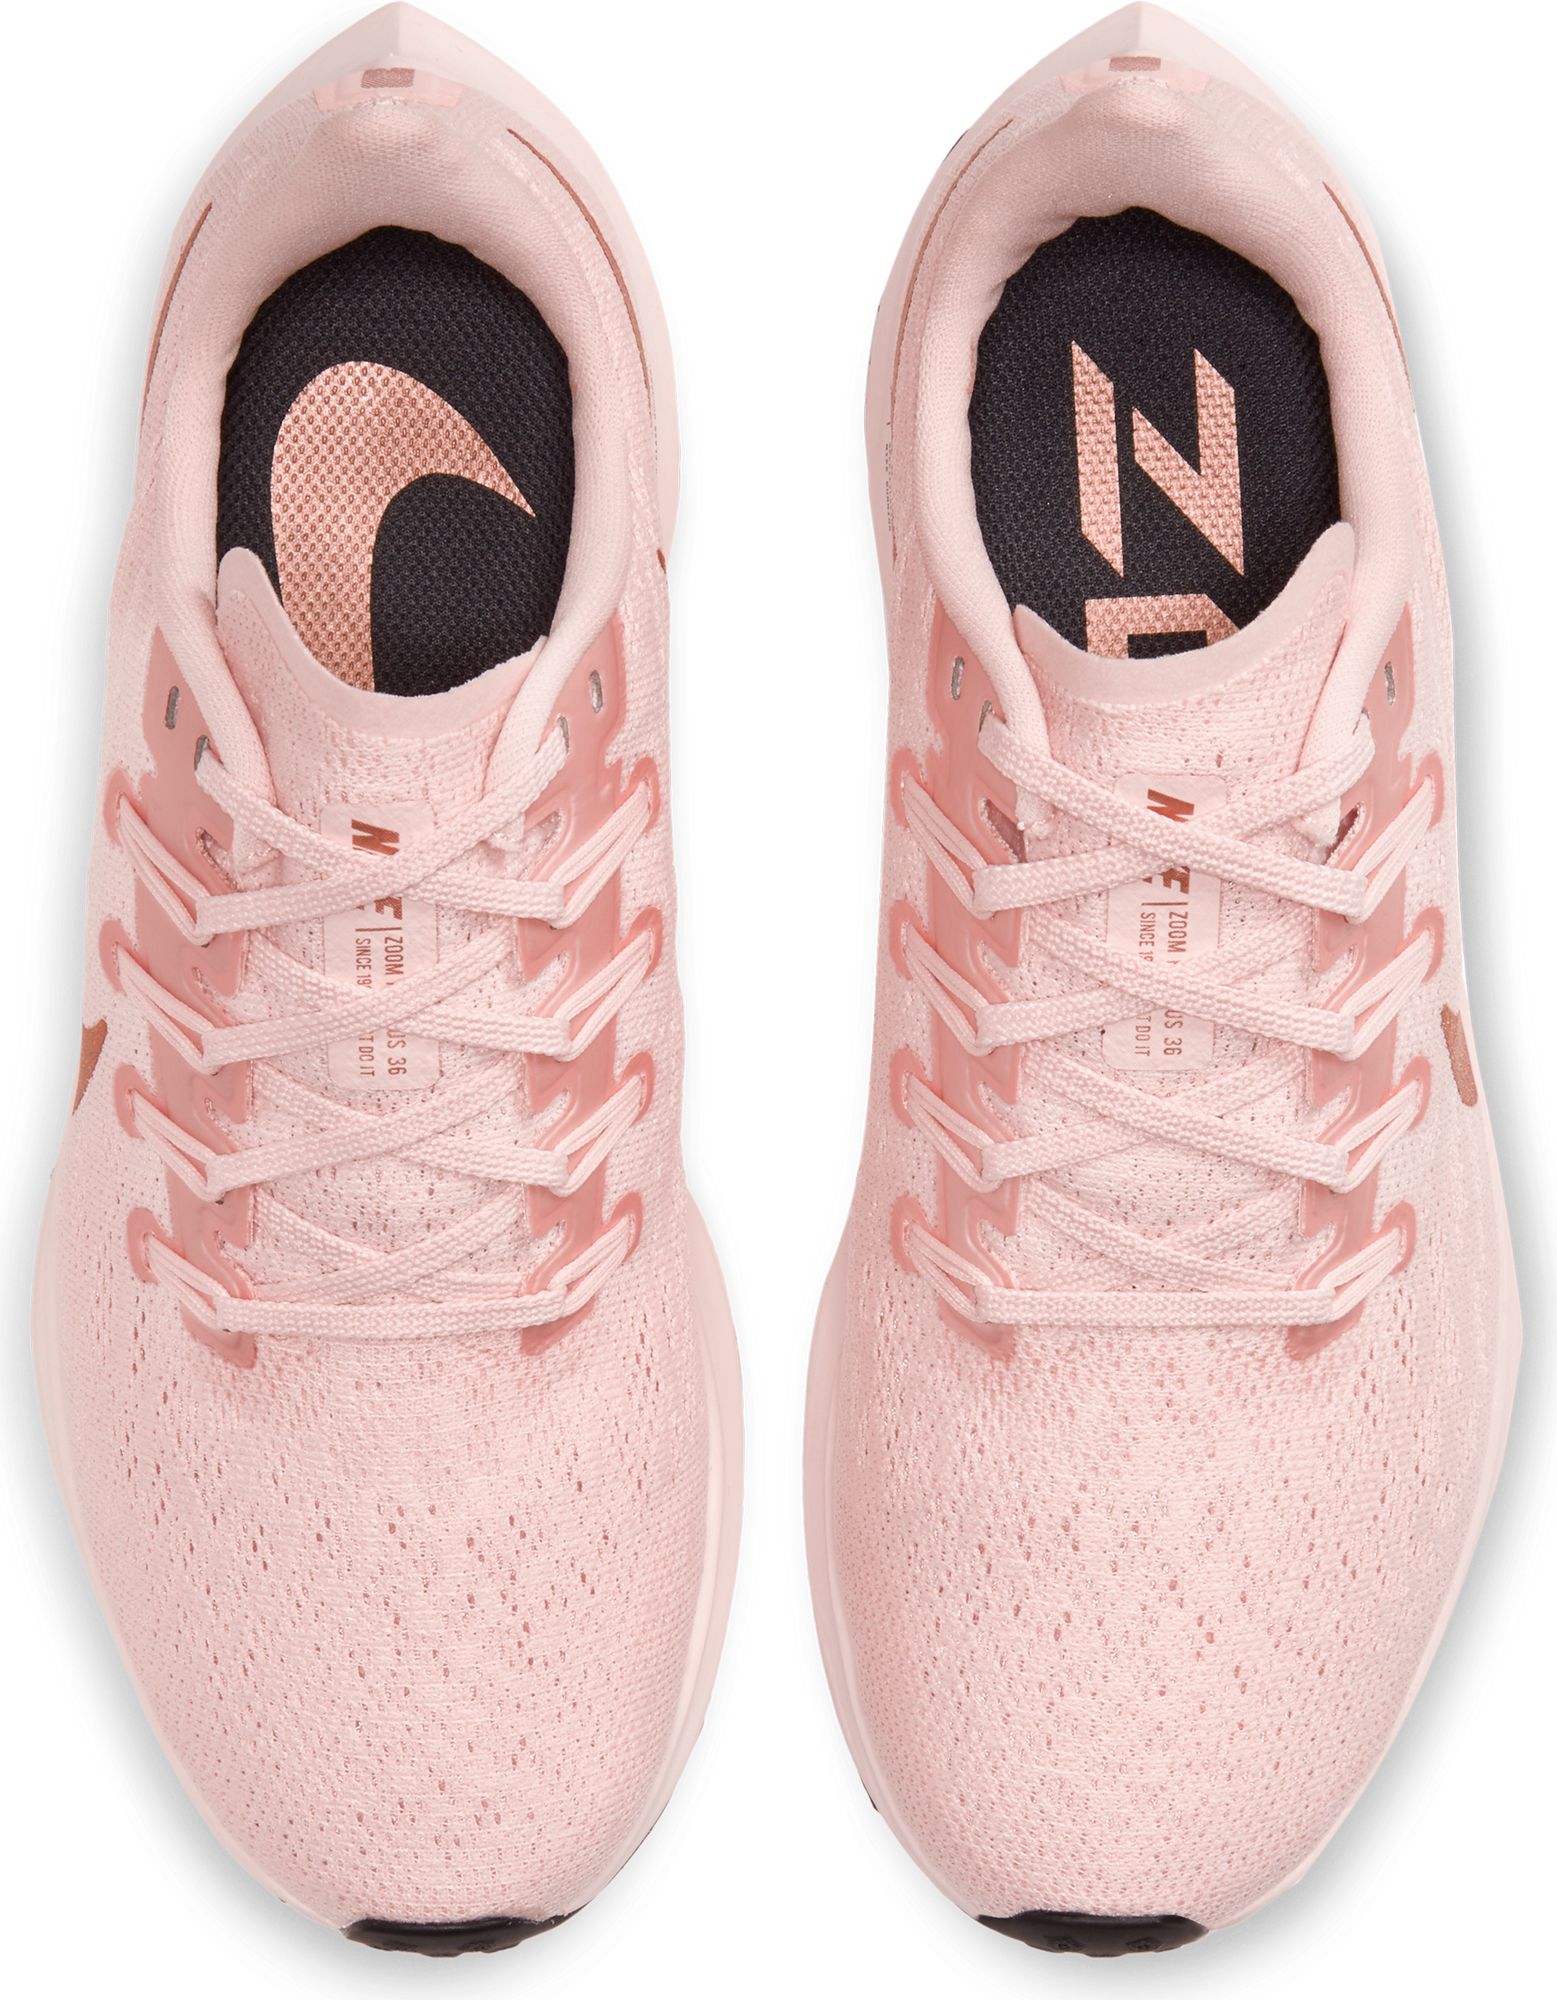 pink sparkly nike shoes